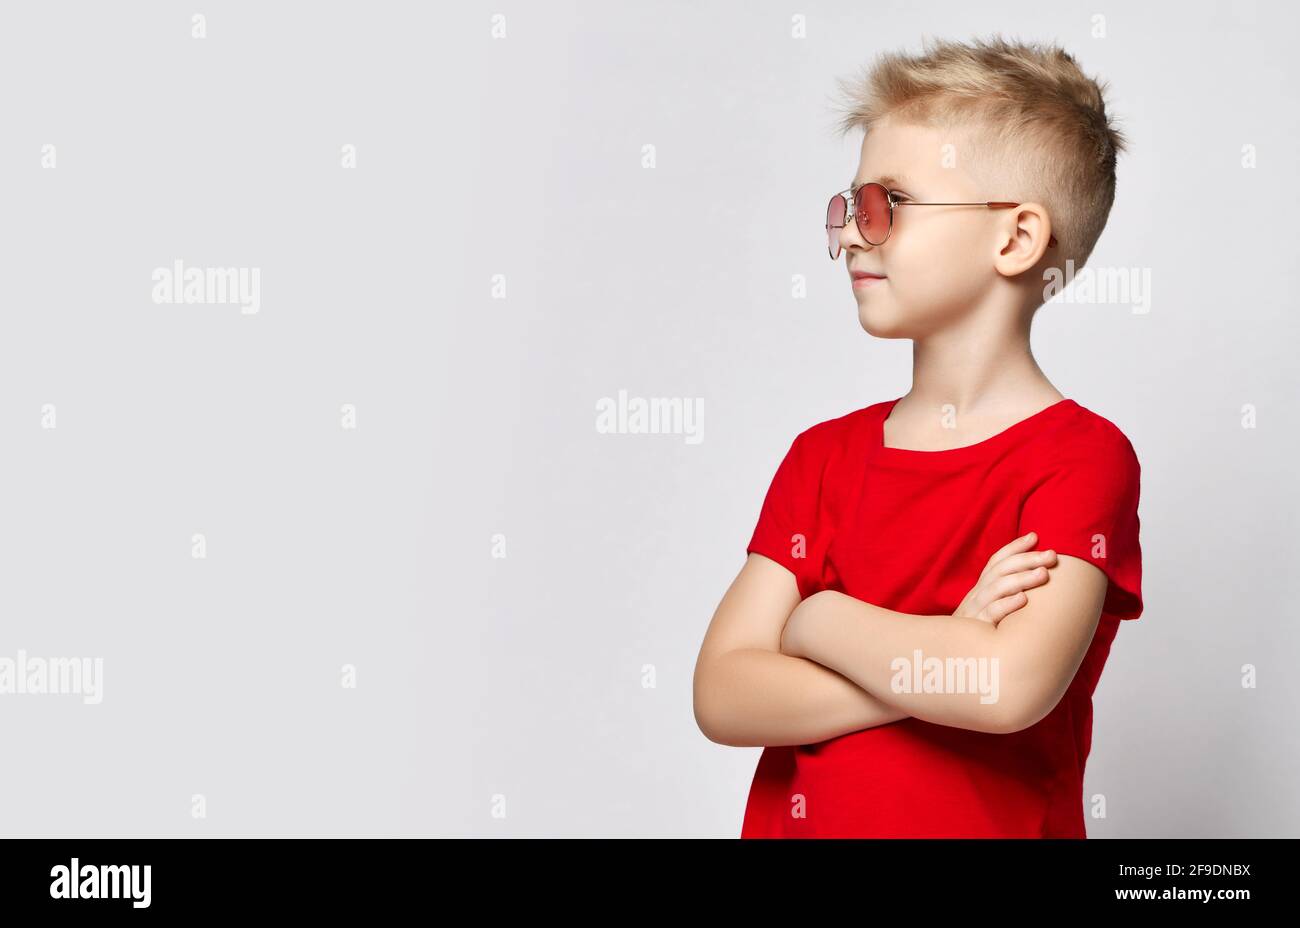 Portrait of blonde kid boy in red t-shirt and sunglasses standing with arms crossed at chest, looking at copy space Stock Photo